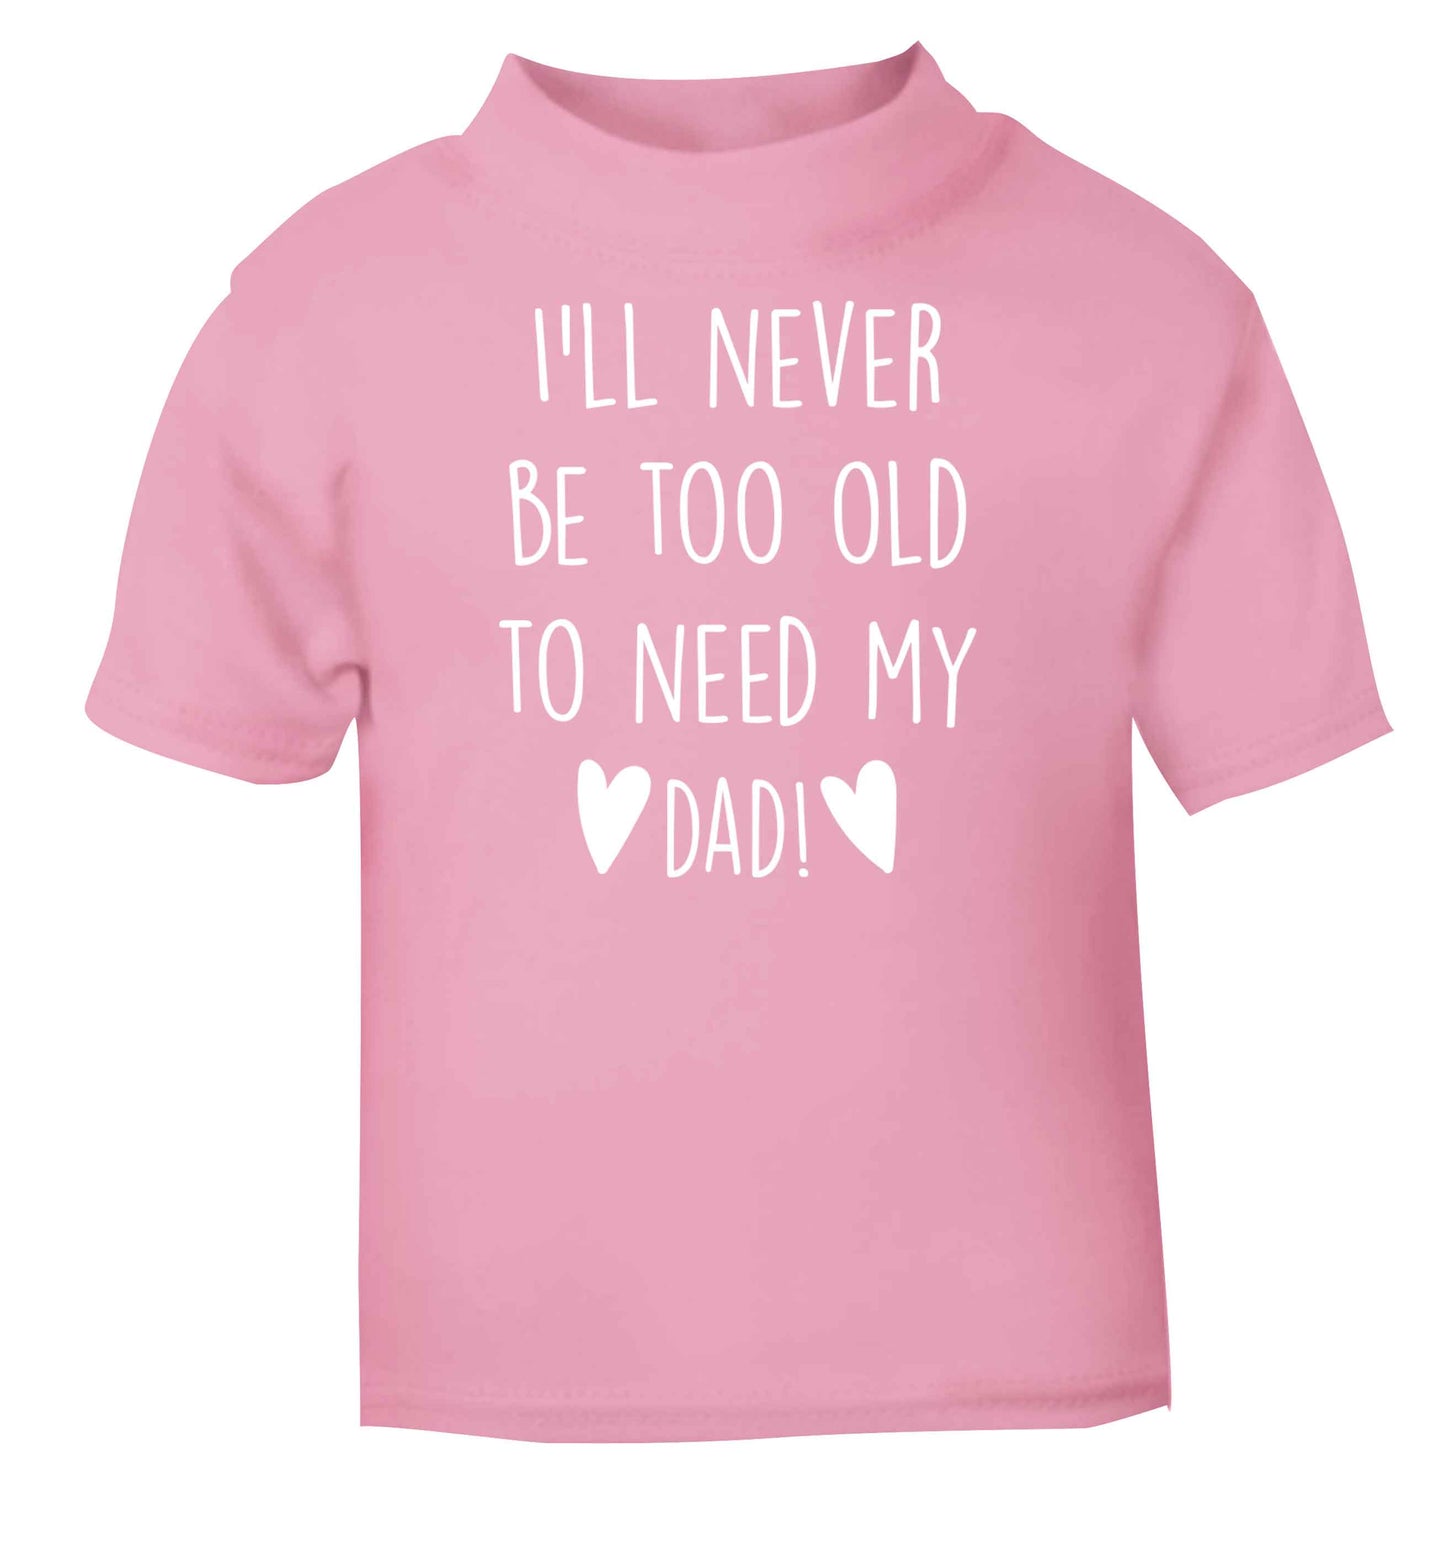 I'll never be too old to need my dad light pink baby toddler Tshirt 2 Years